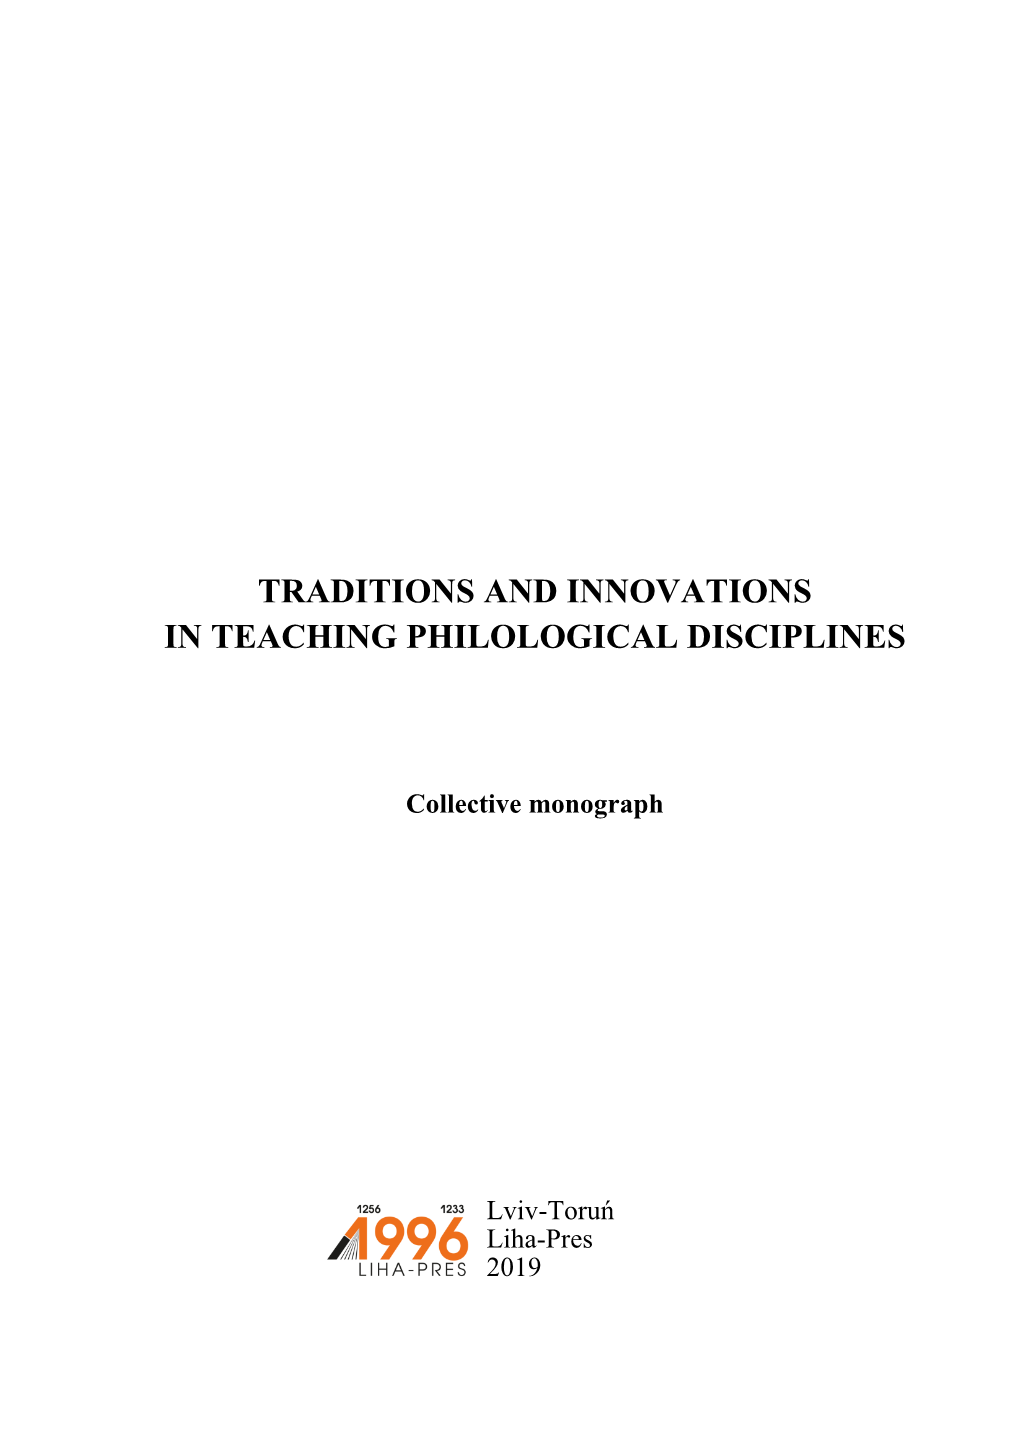 Traditions and Innovations in Teaching Philological Disciplines